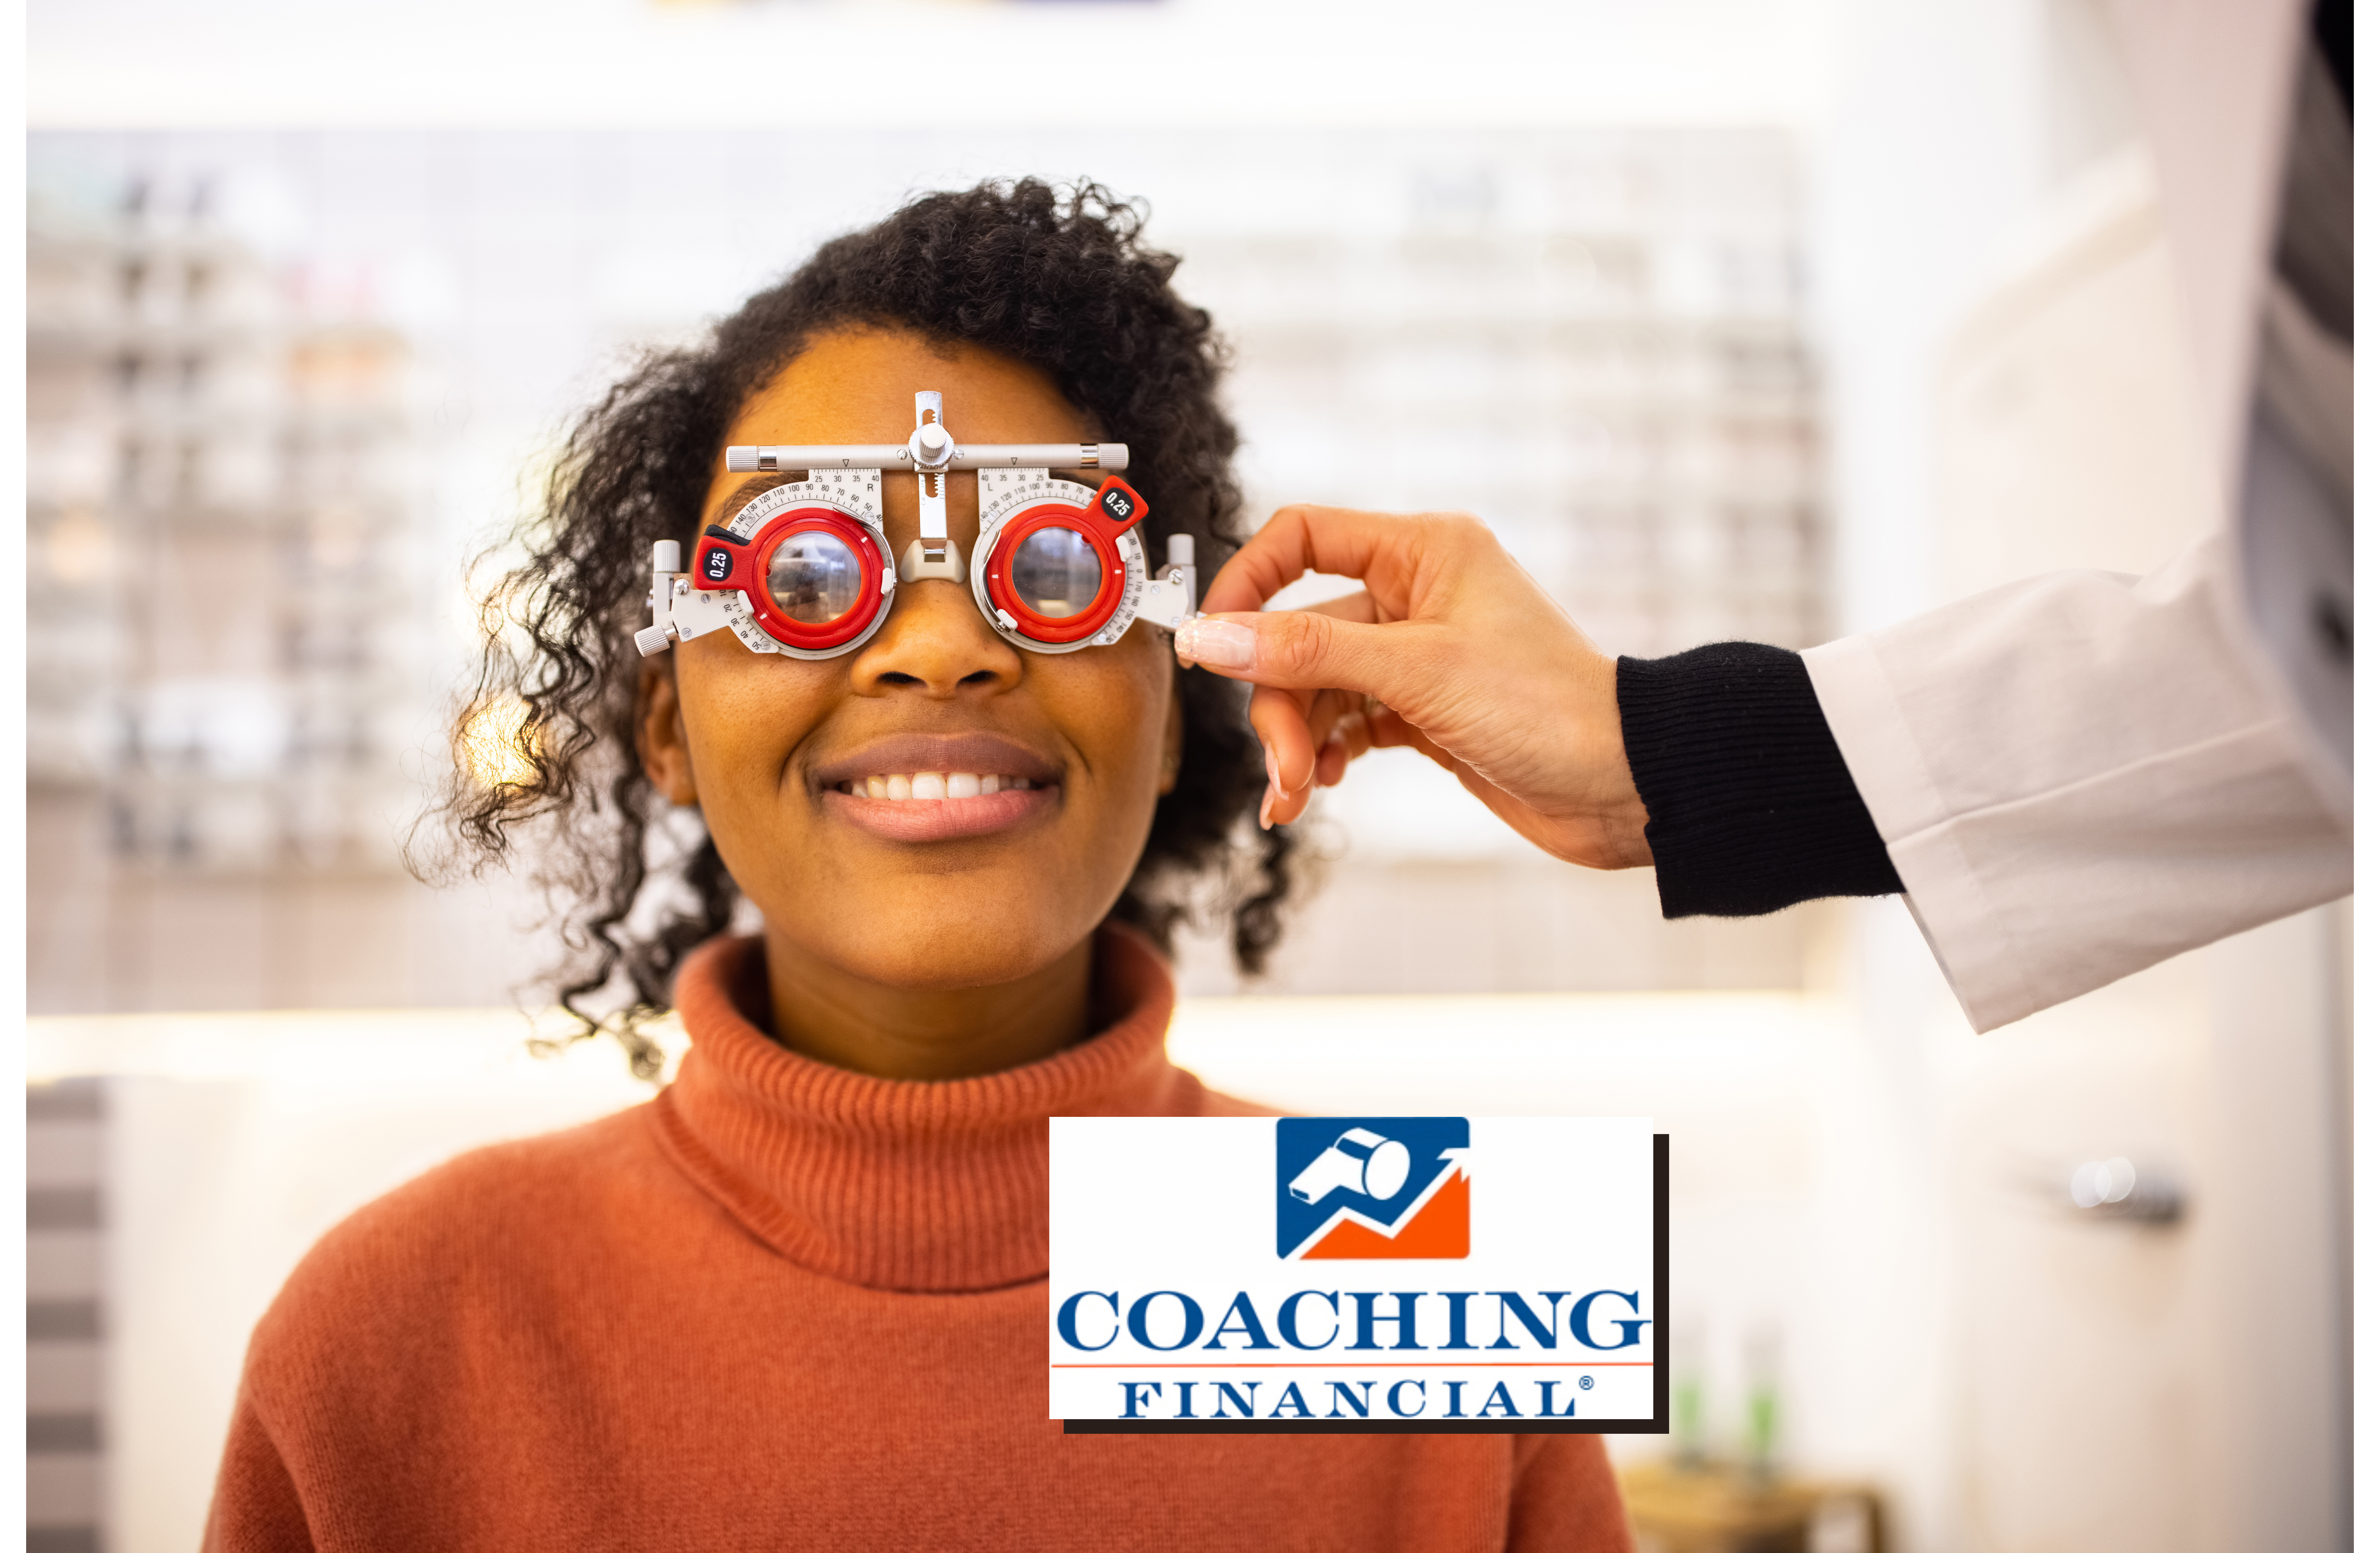 Coaching Financial Logo with image for vision